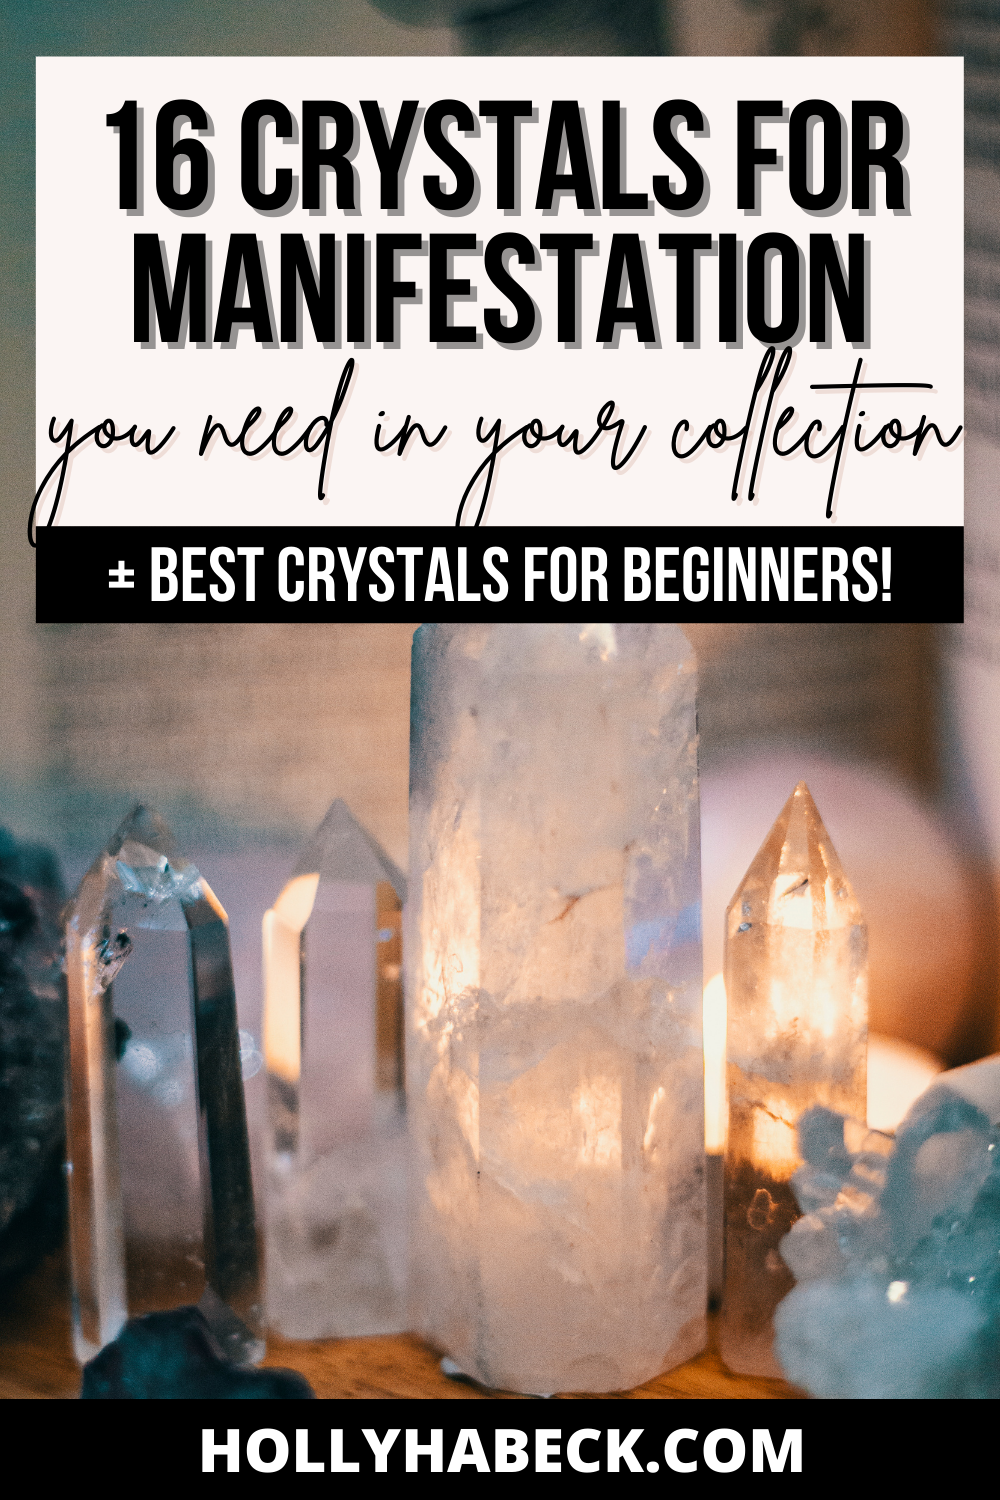 16 Crystals For Manifestation You Need in Your Collection + Best Crystals for Beginners